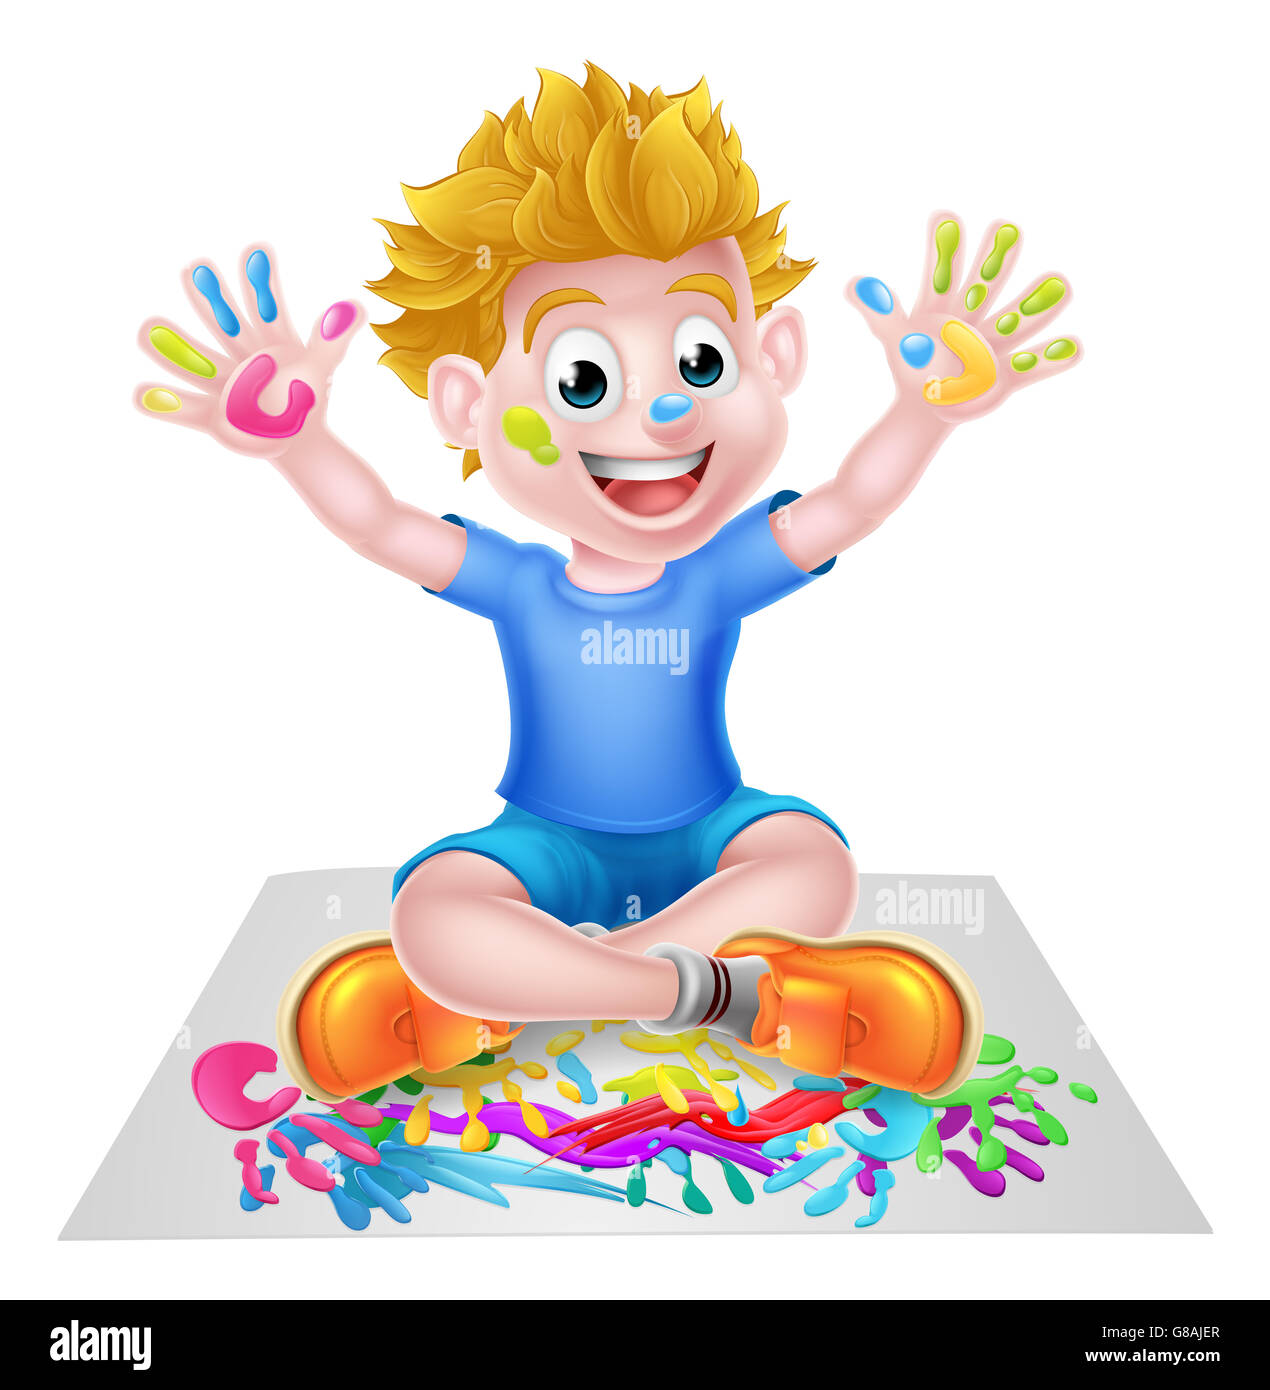 A happy cartoon little boy being creative playing with paint Stock Photo